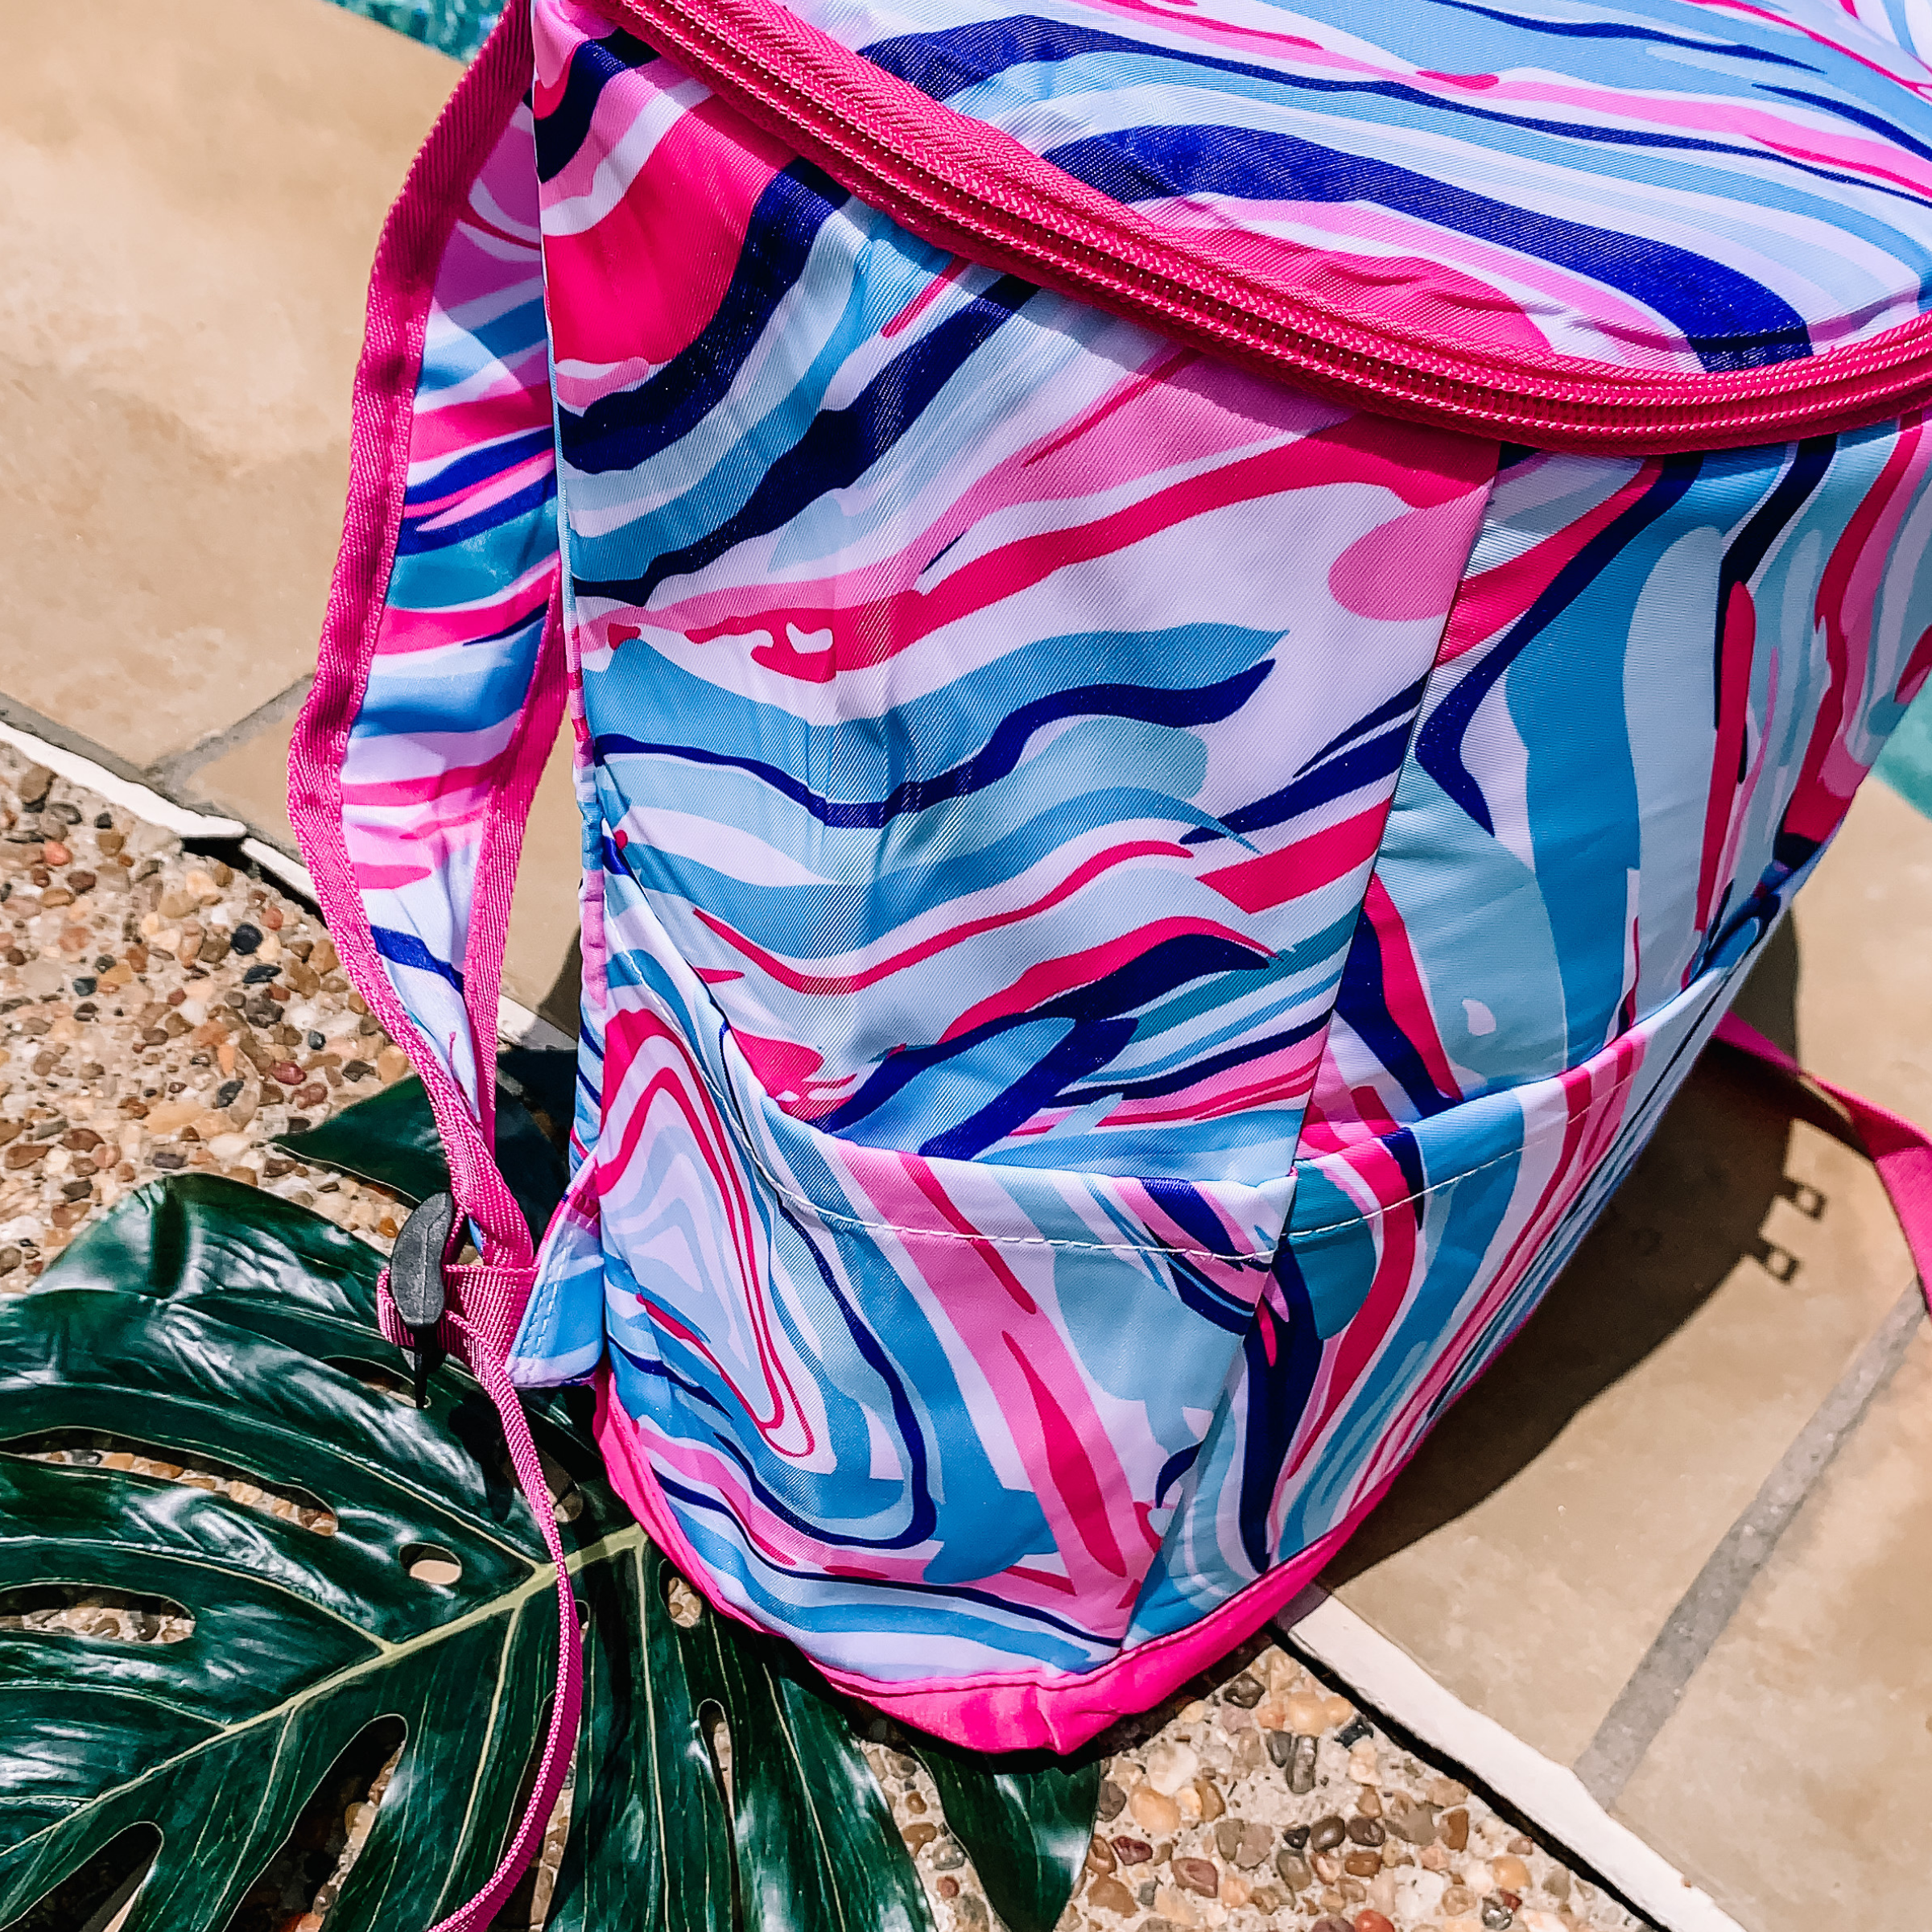 Here To Party Backpack Cooler in Multi Swirl